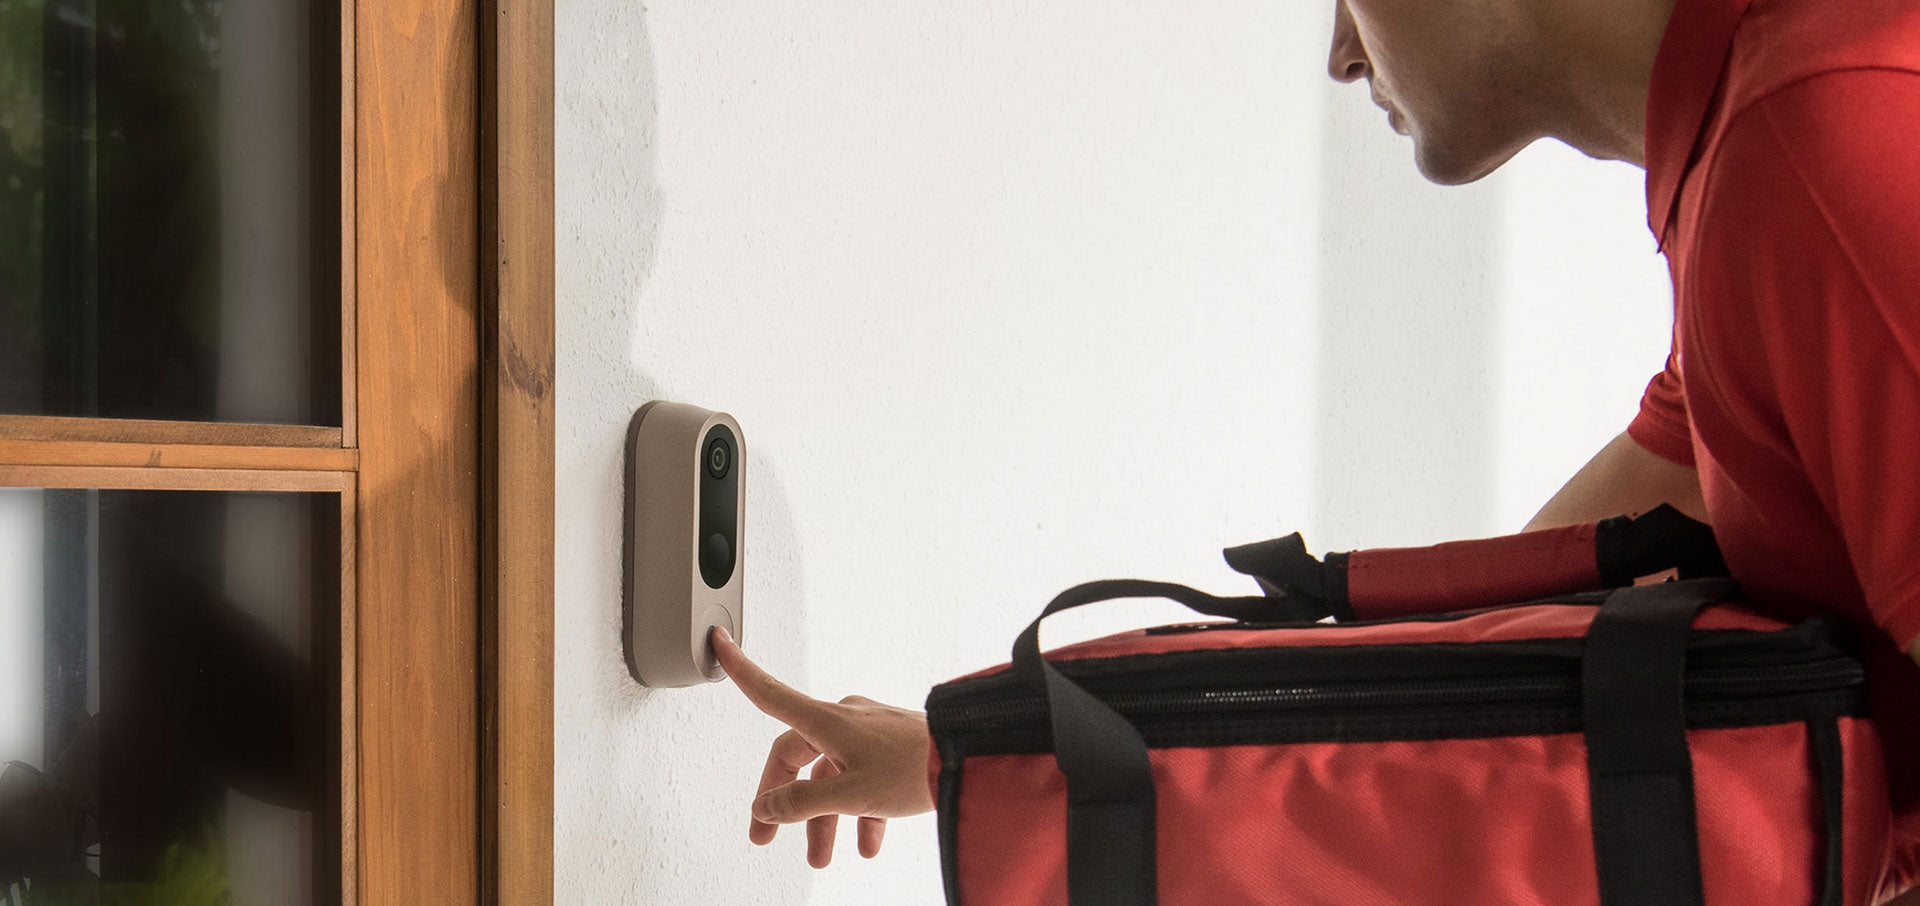 "Nooie made it beyond amazing in every sense of the way" Says Tech Dissected of Doorbell Cam